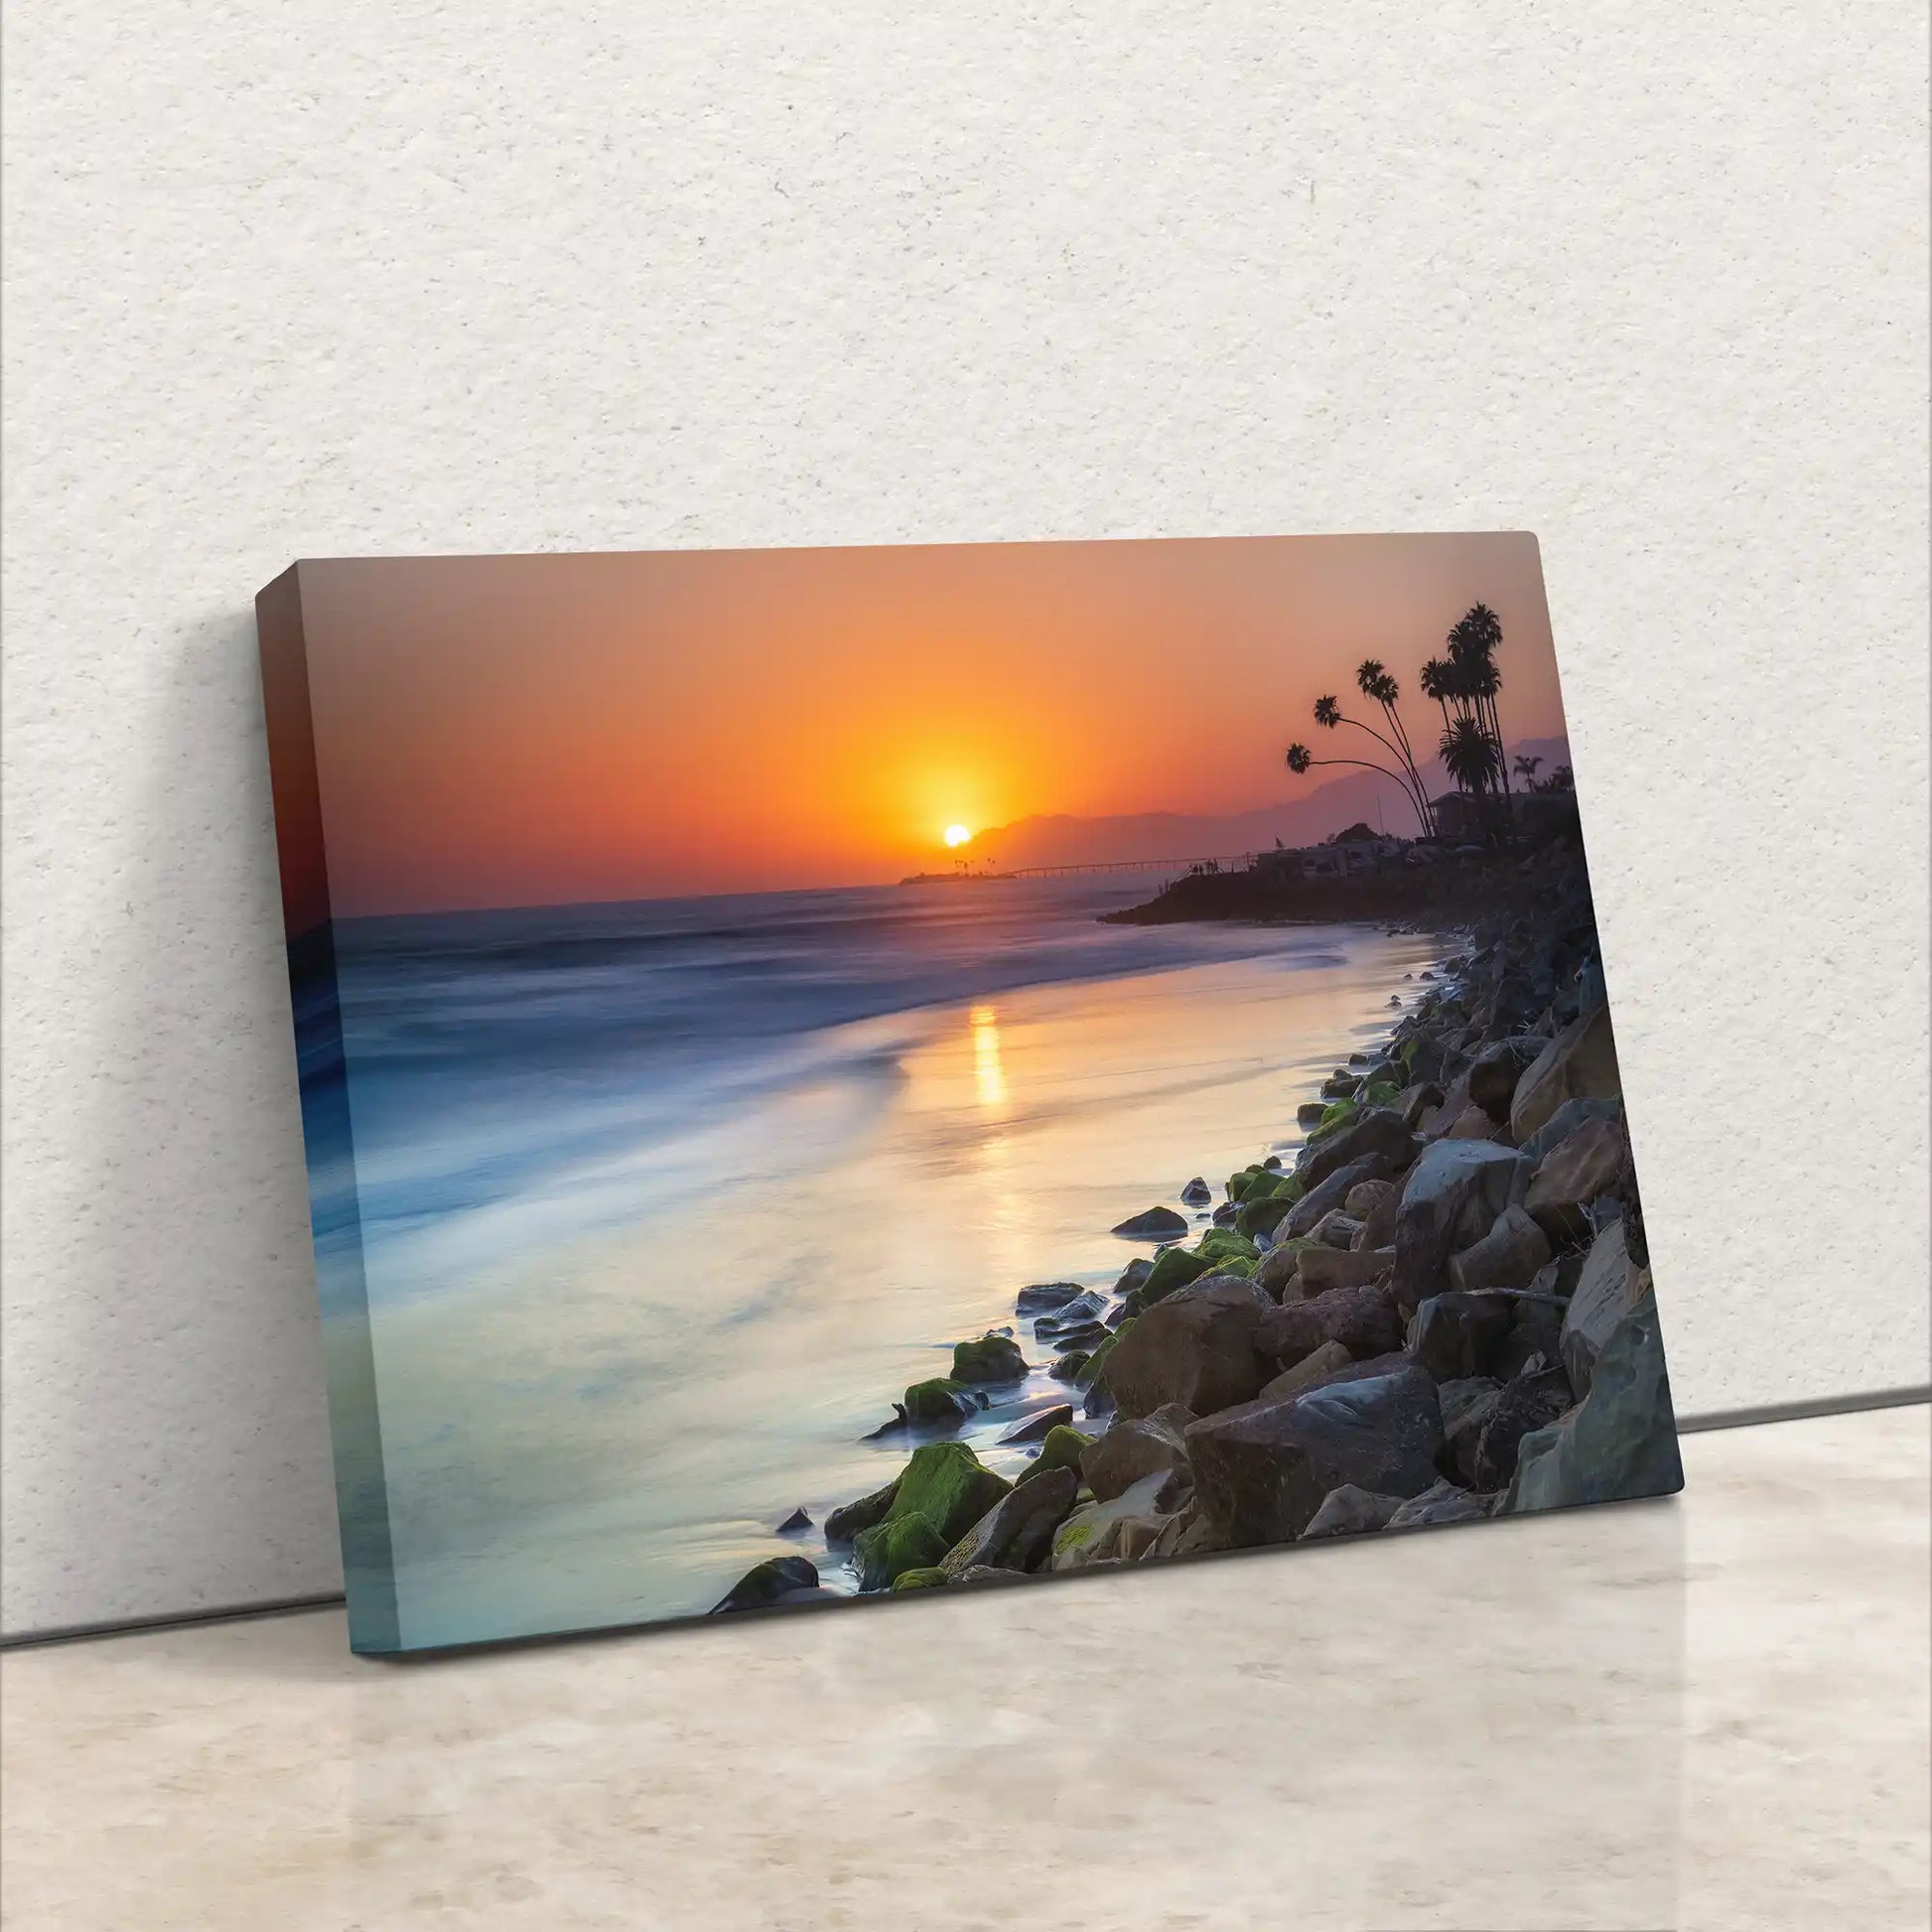 Side angle of Ventura Beach sunset canvas art, showcasing the thickness and sturdy construction ready to hang.